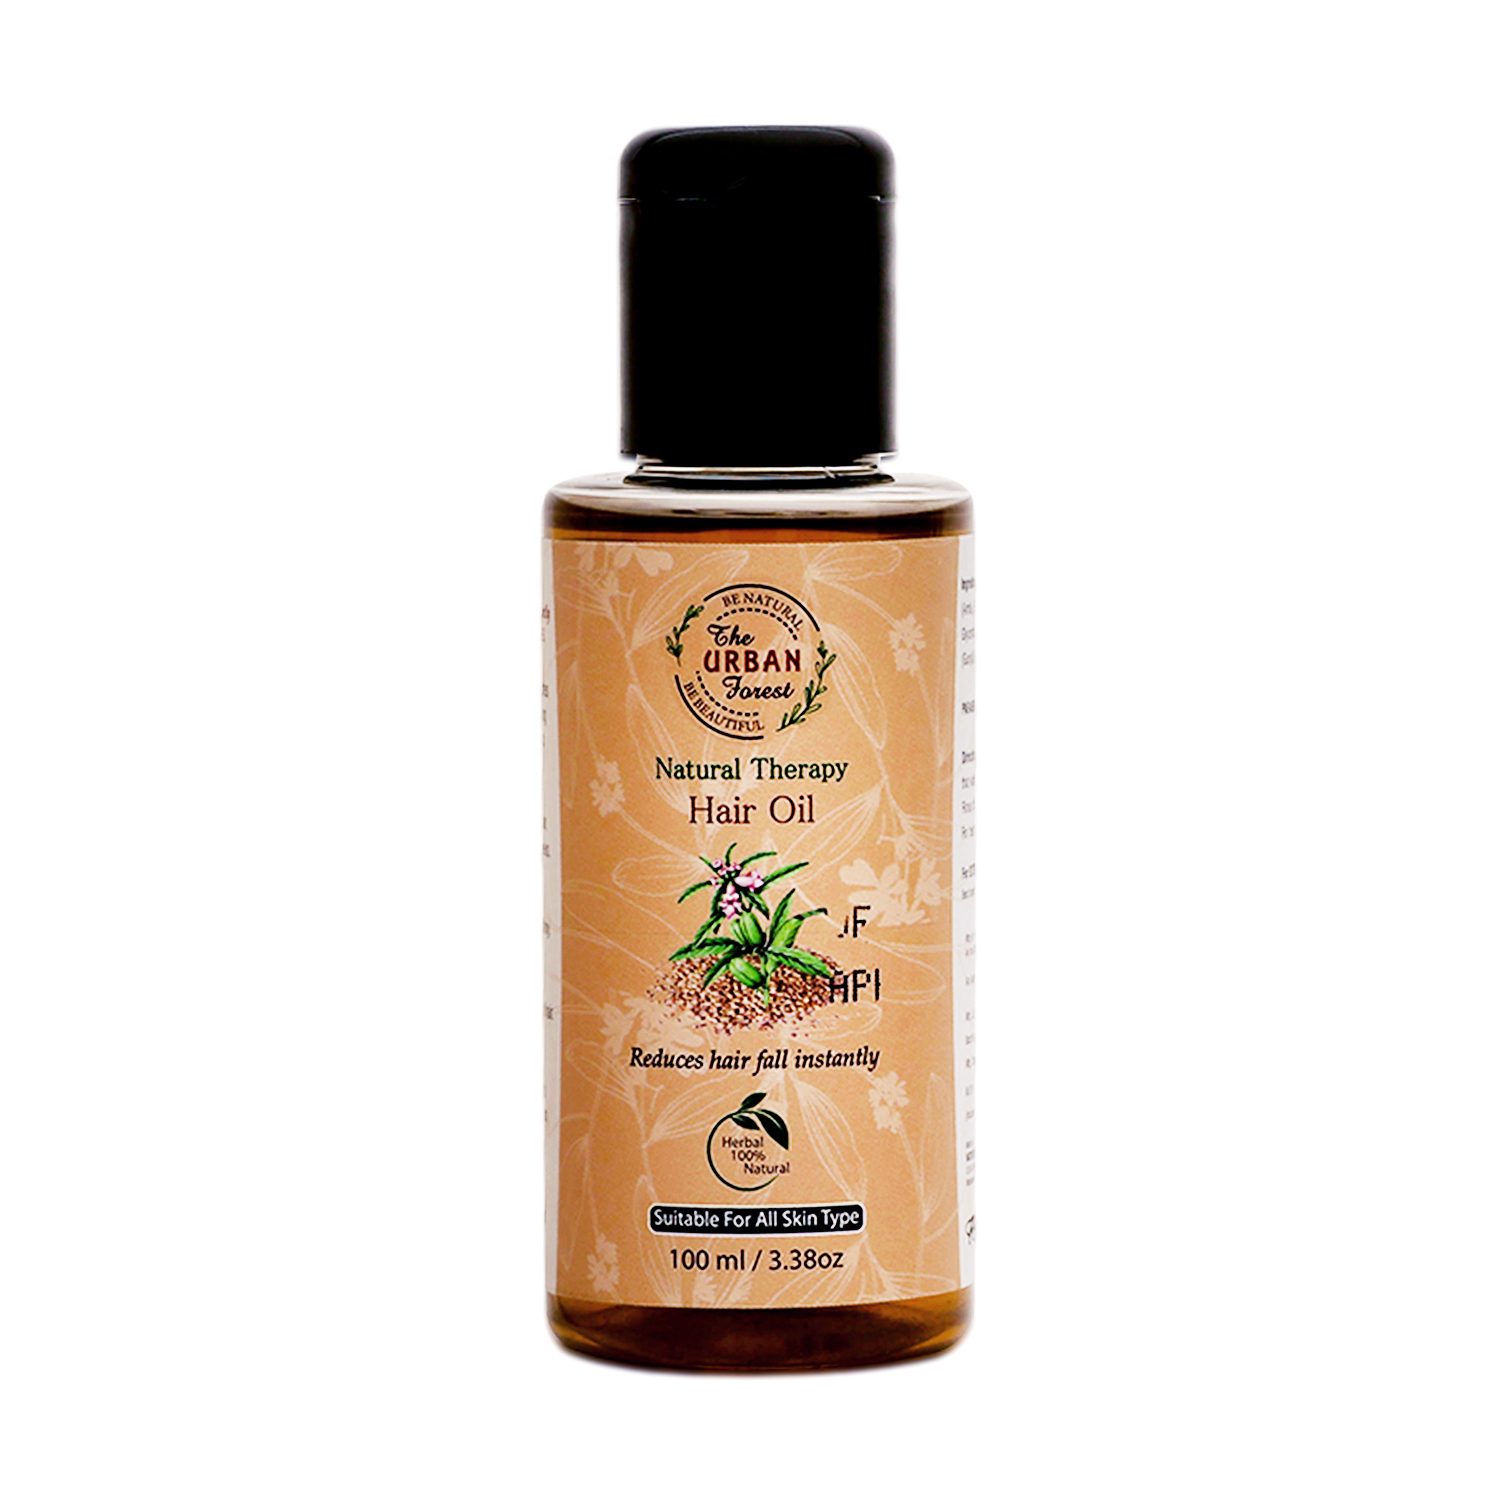 Natural Therapy Hair Oil - The Urban Forest